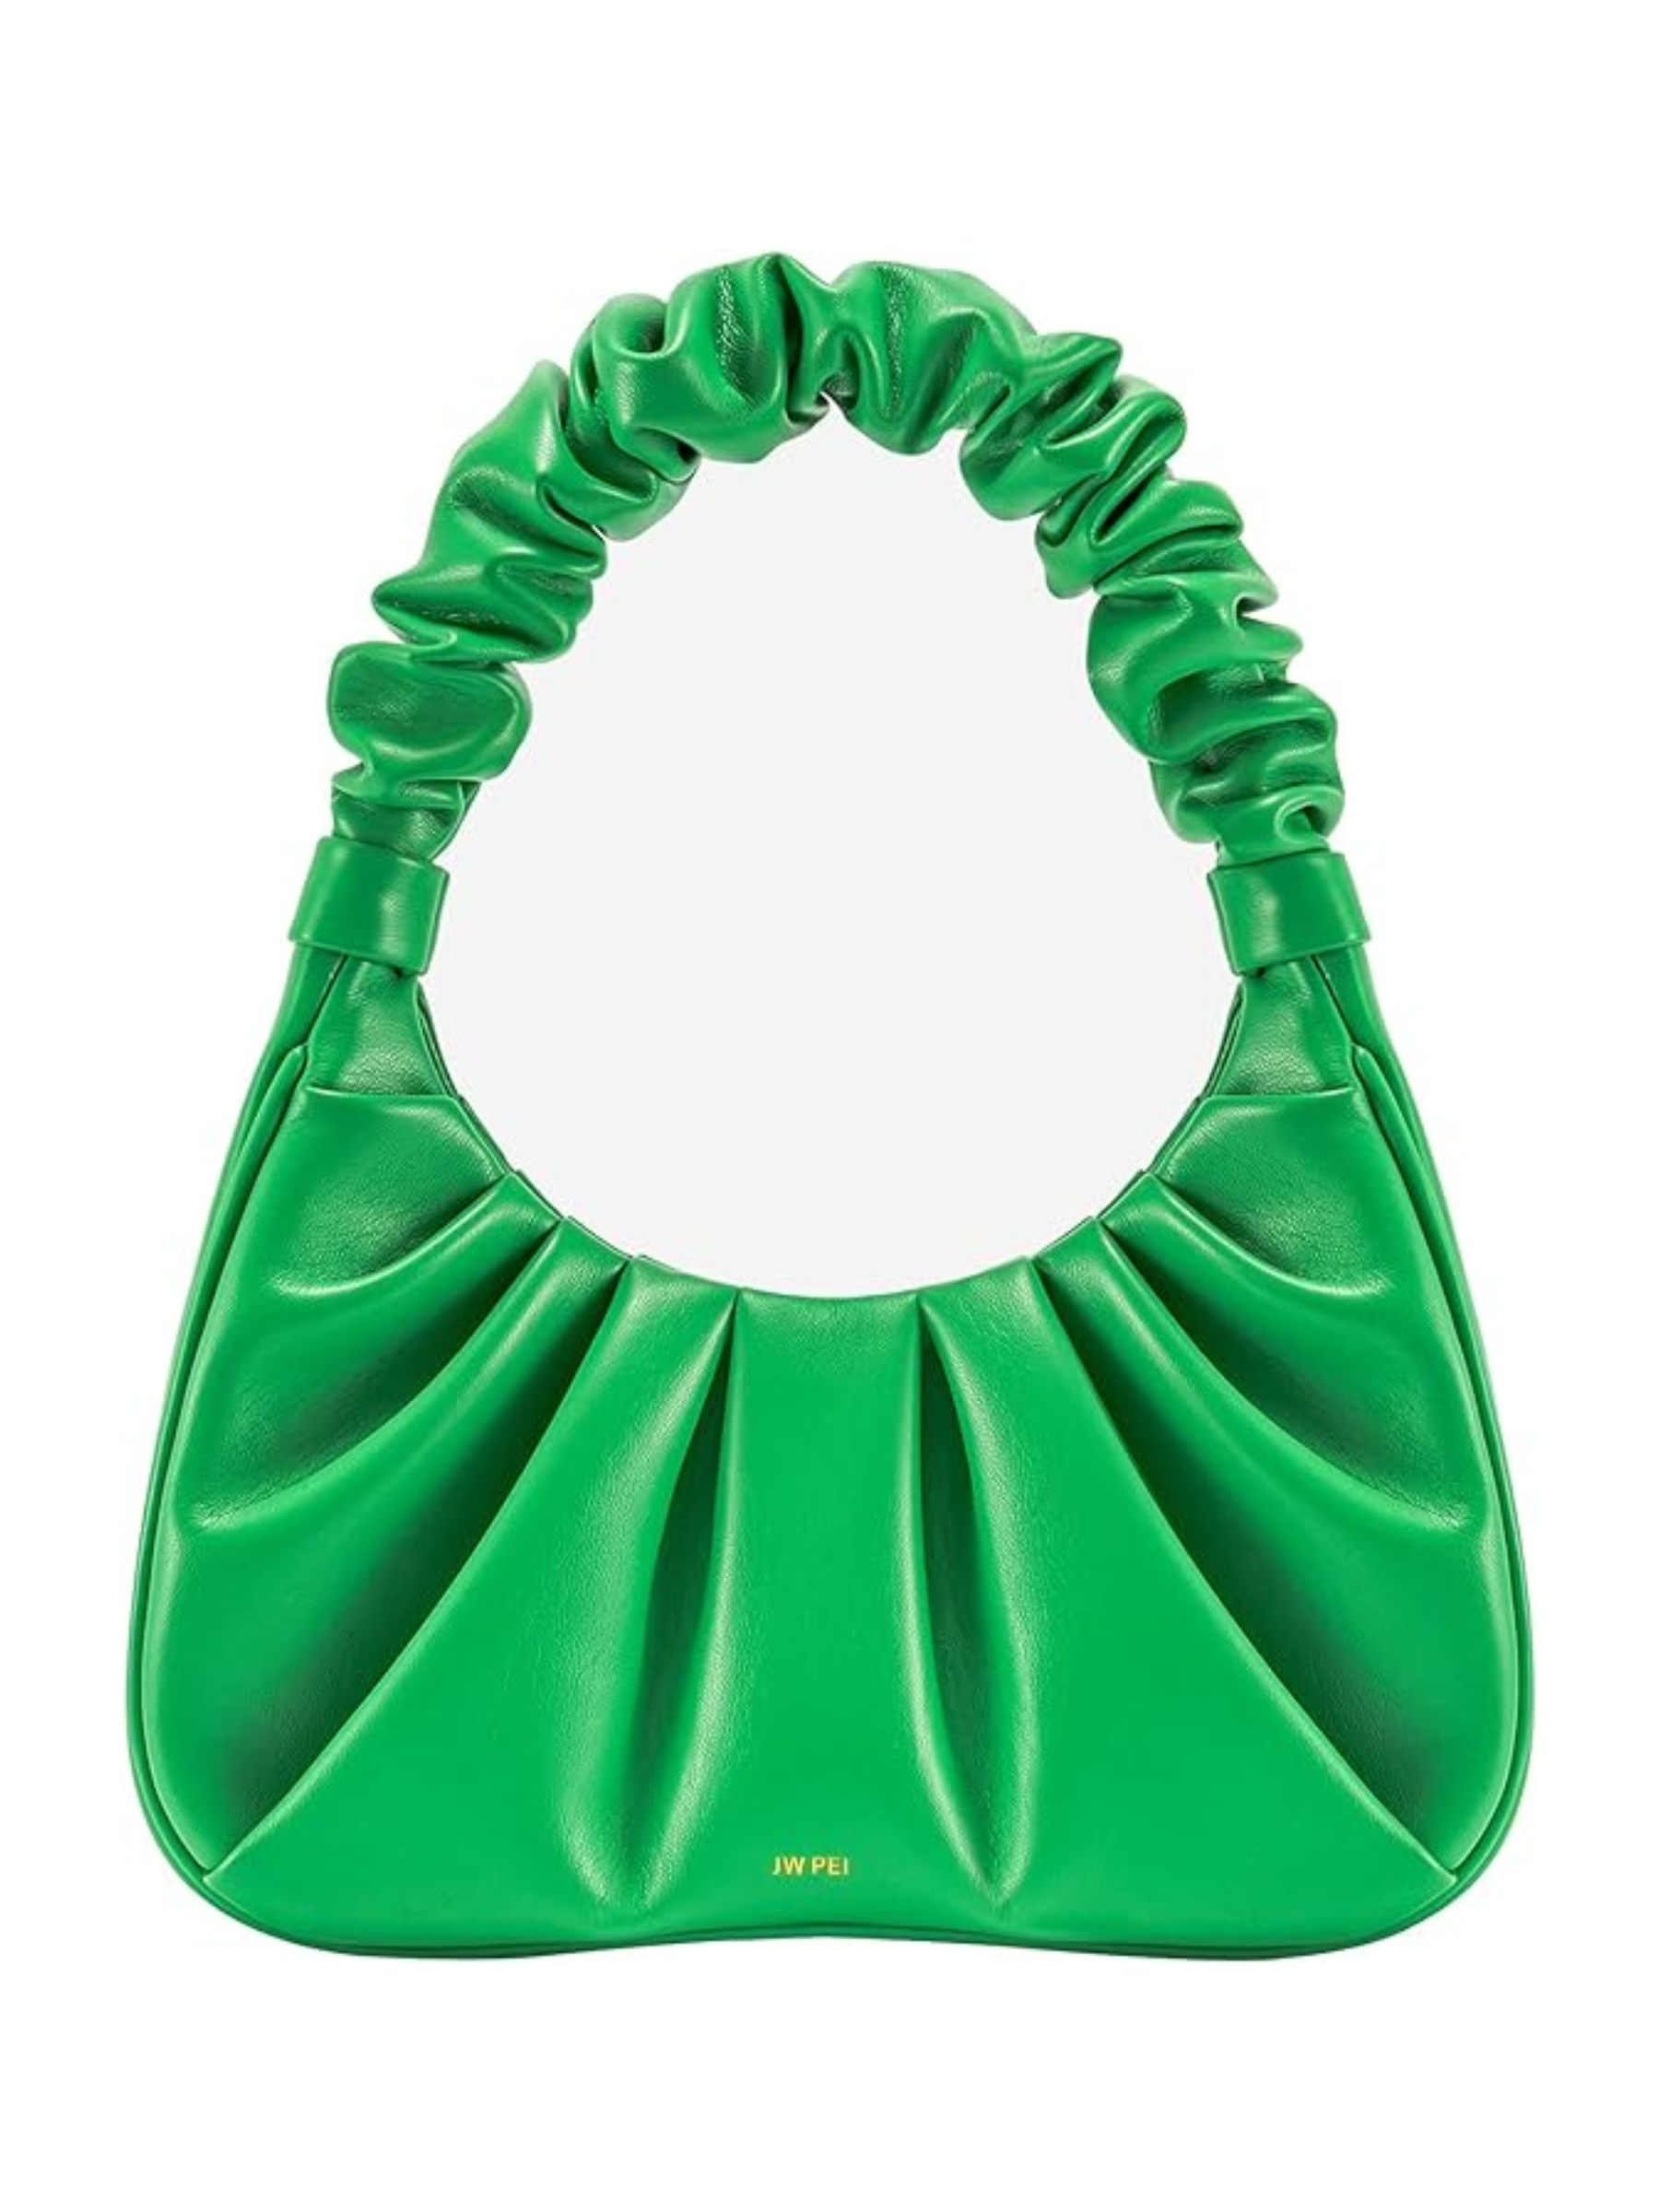 This “It” bag comes in the best mix of colors and a few surprise styles like a magenta faux fur or a lime green shade with crystal embellishments. $80, Amazon. <a href="https://www.amazon.com/dp/B094QT219C?">Get it now!</a><p>Sign up for today’s biggest stories, from pop culture to politics.</p><a href="https://www.glamour.com/newsletter/news?sourceCode=msnsend">Sign Up</a>